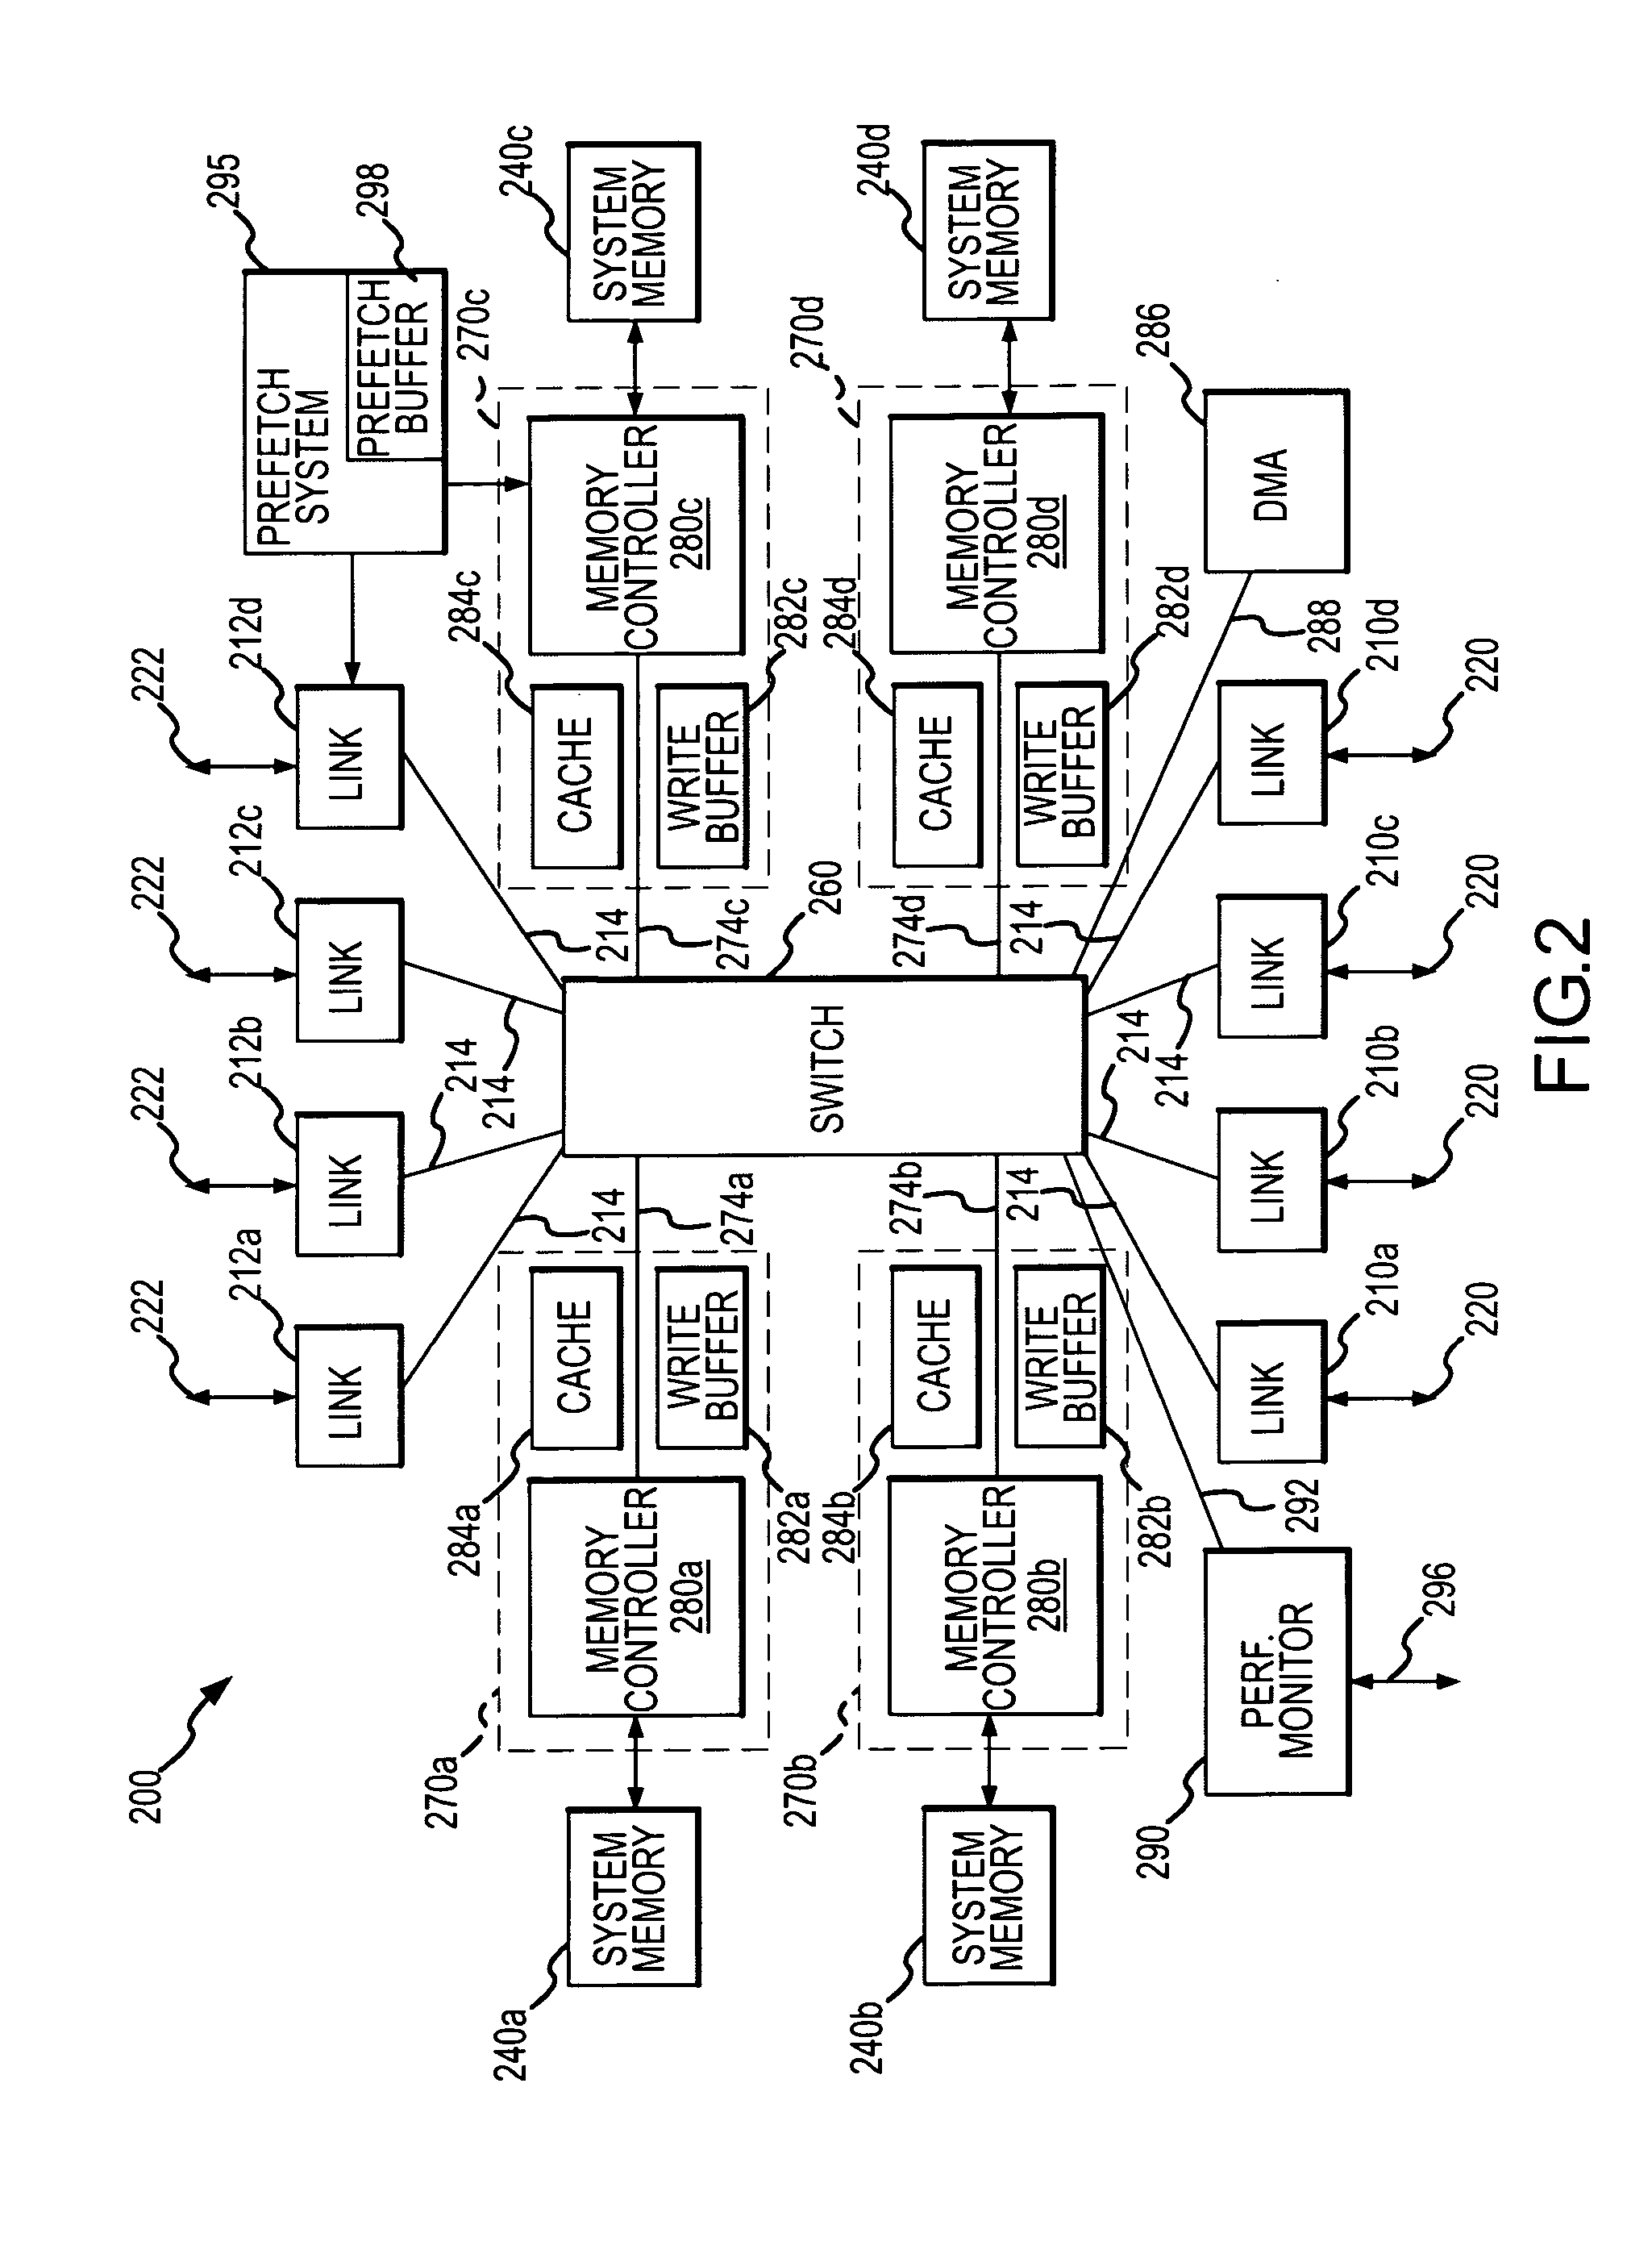 Memory hub and method for memory system performance monitoring